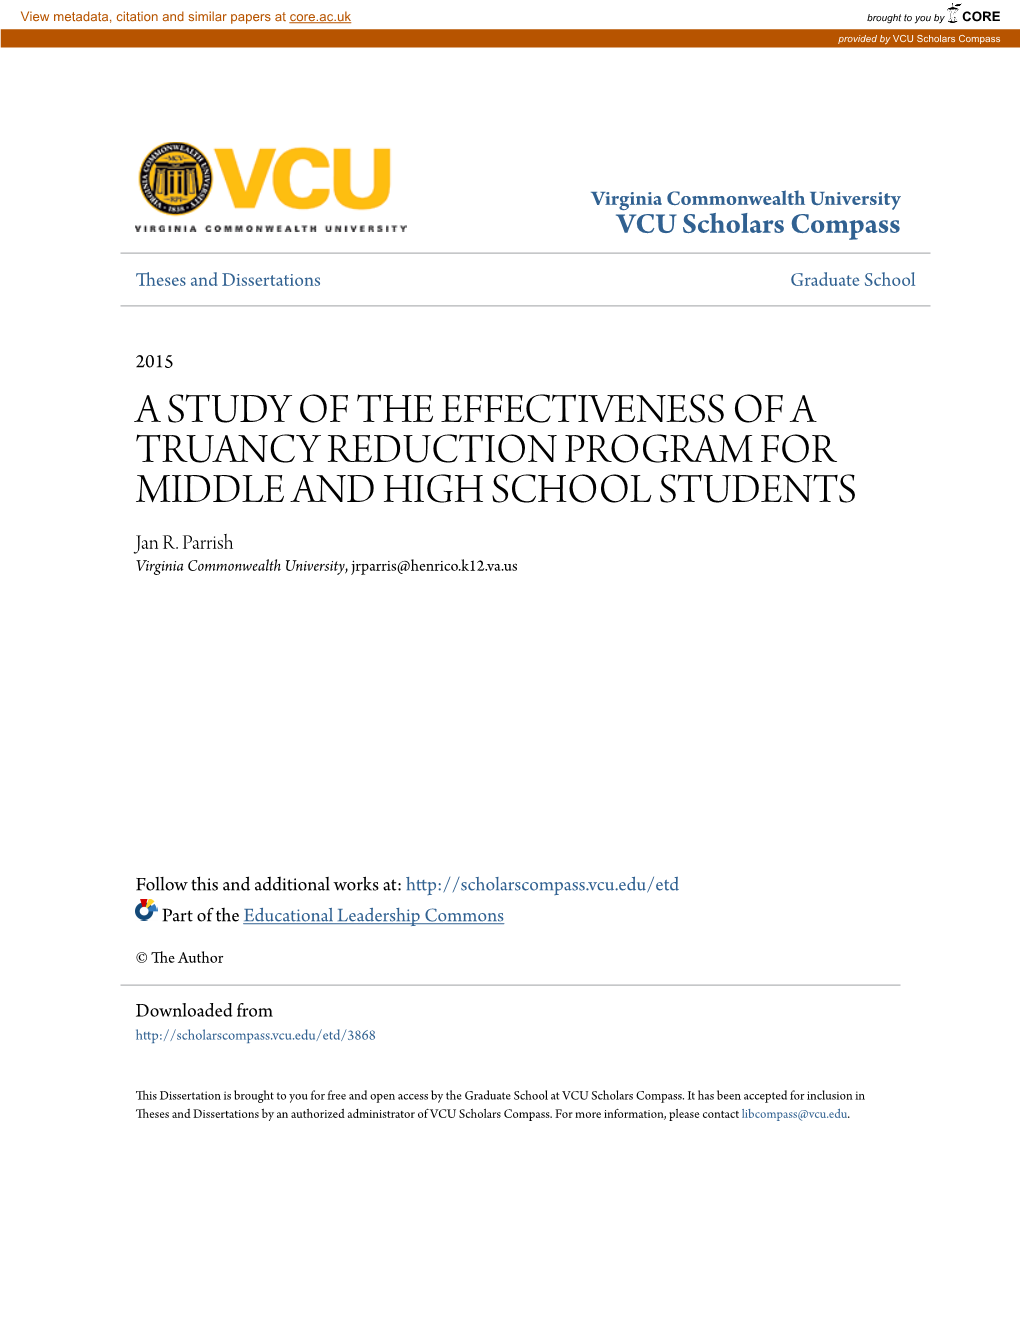 A STUDY of the EFFECTIVENESS of a TRUANCY REDUCTION PROGRAM ORF MIDDLE and HIGH SCHOOL STUDENTS Jan R